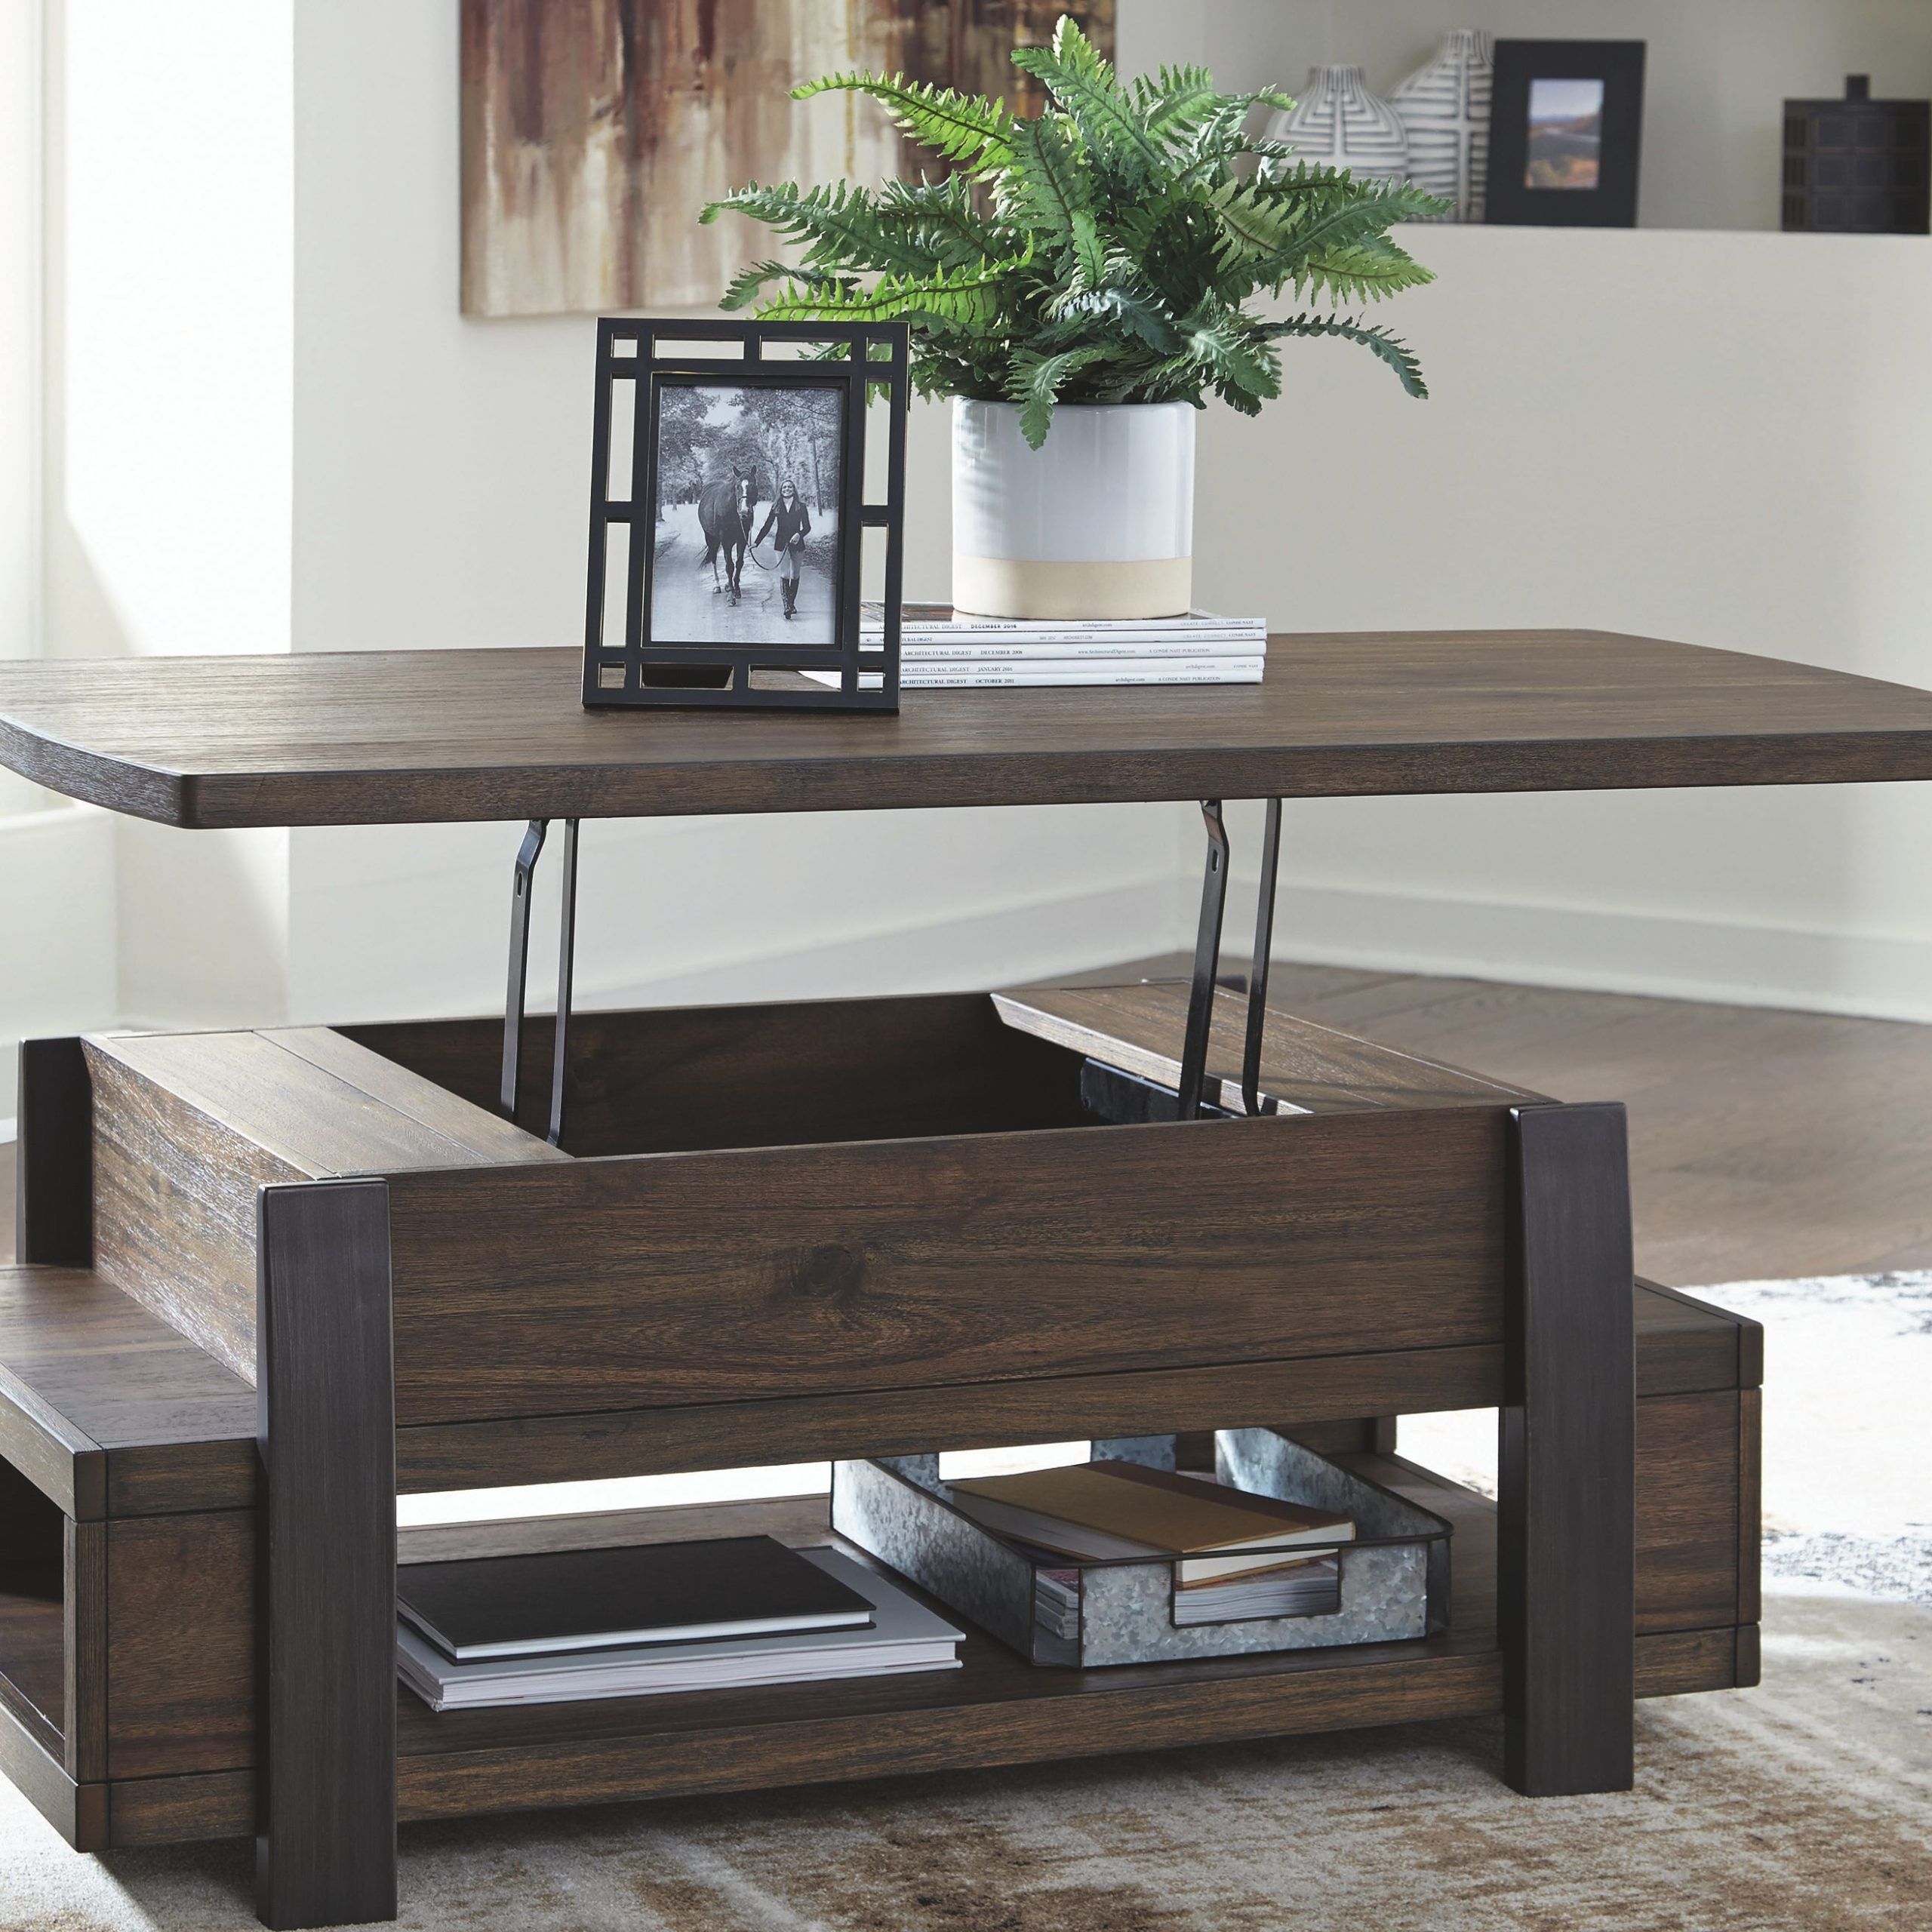 Vailbry Coffee Table With Lift Top, Brown | Lift Top Coffee Table Intended For High Gloss Lift Top Coffee Tables (View 6 of 21)